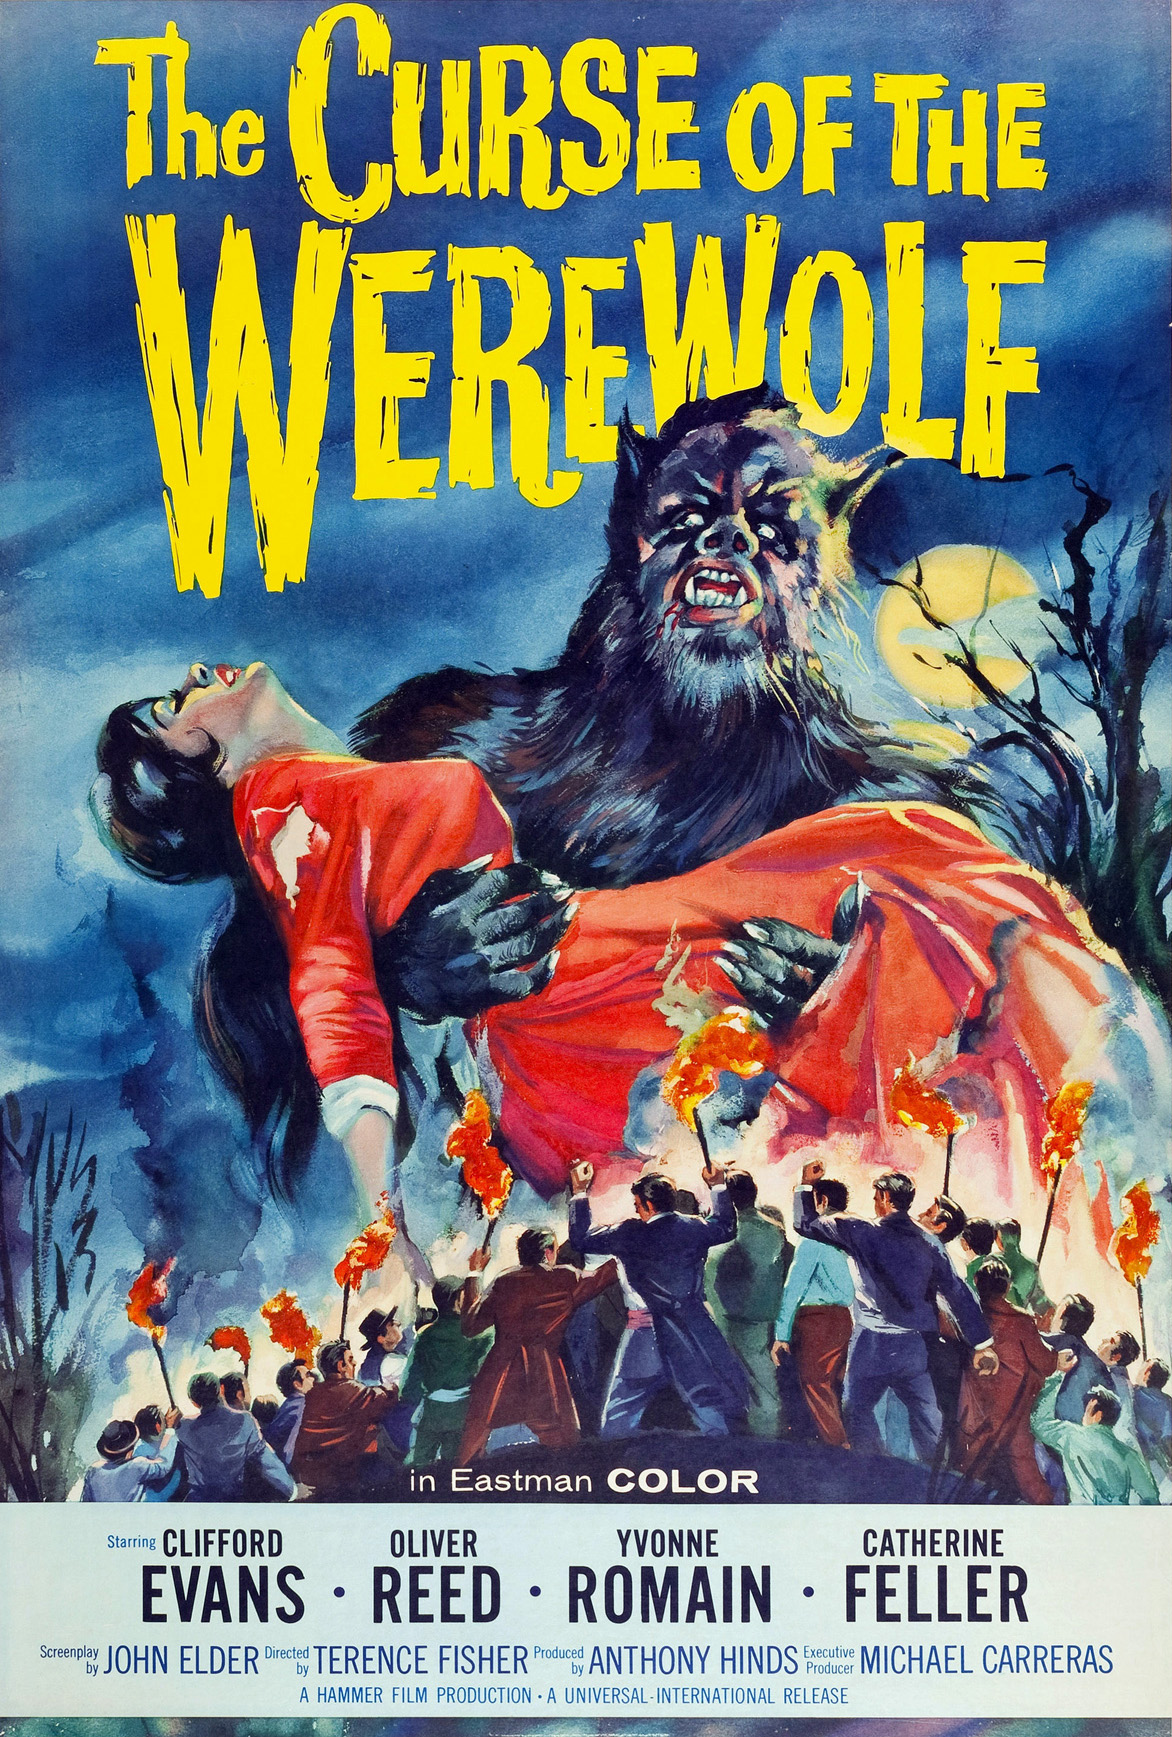 bhavesh dwivedi recommends Raped By A Werewolf